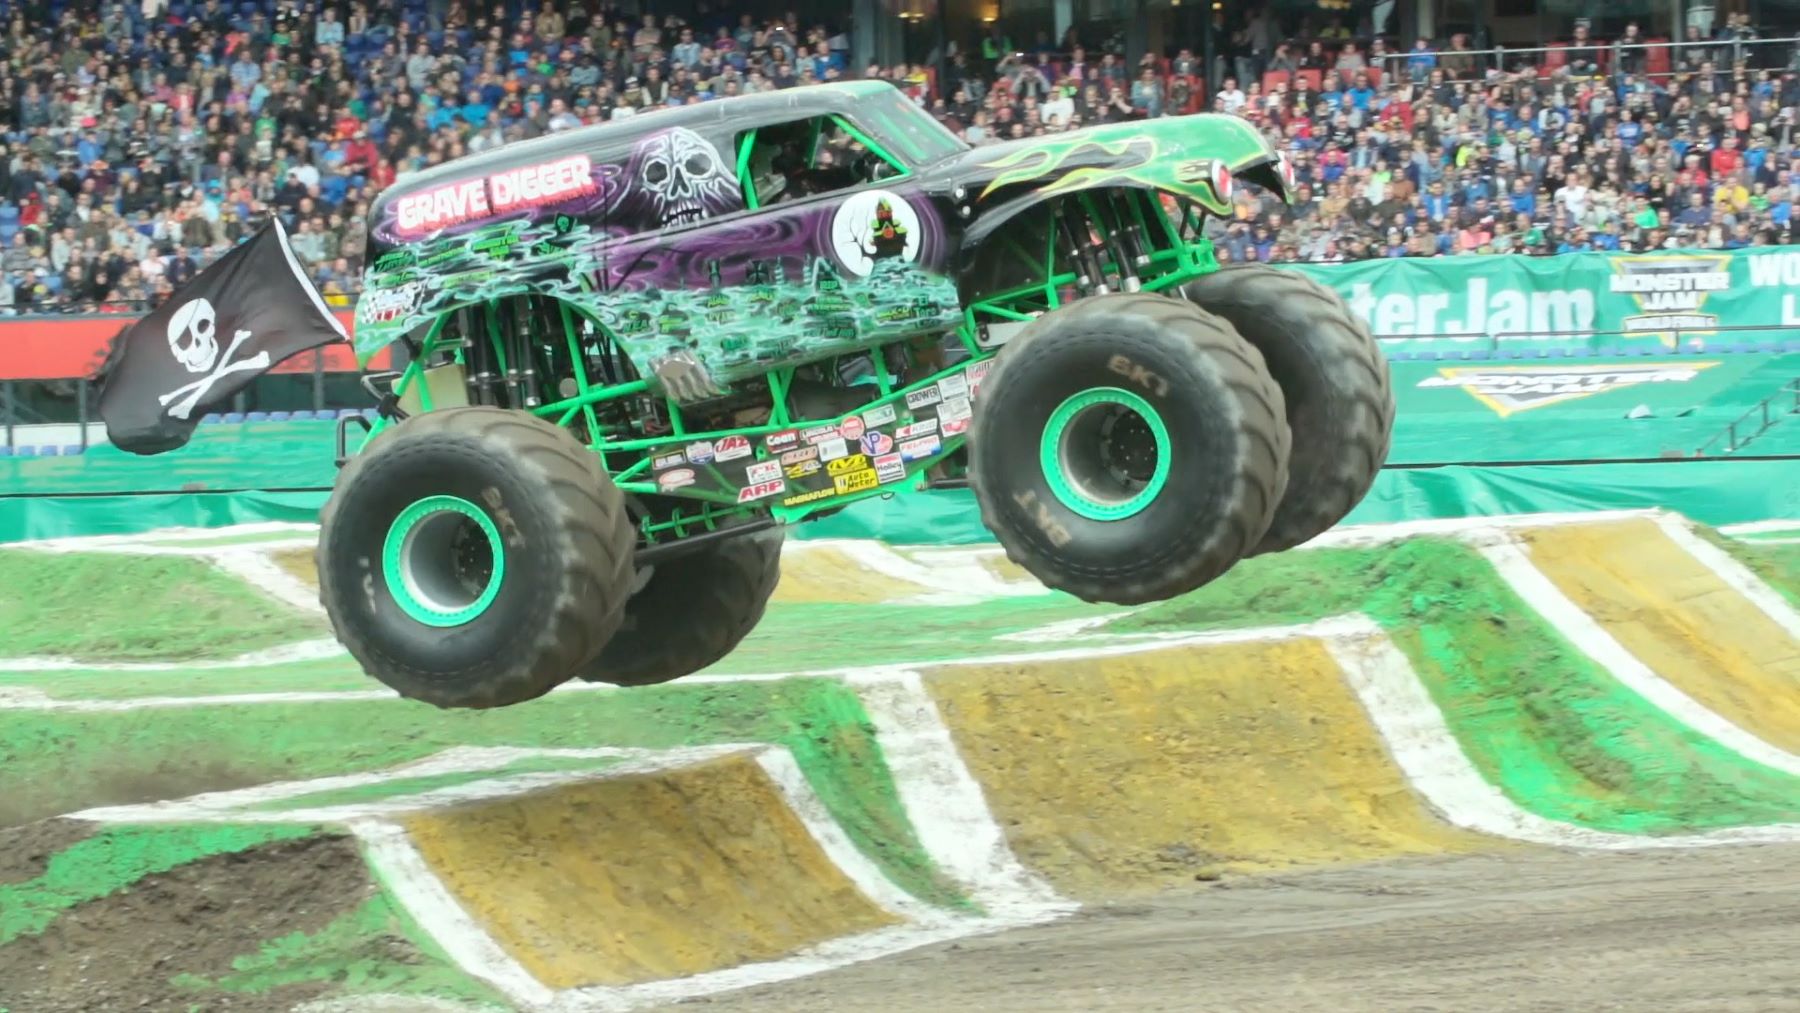 The Grave Digger monster truck flying in Rotterdam